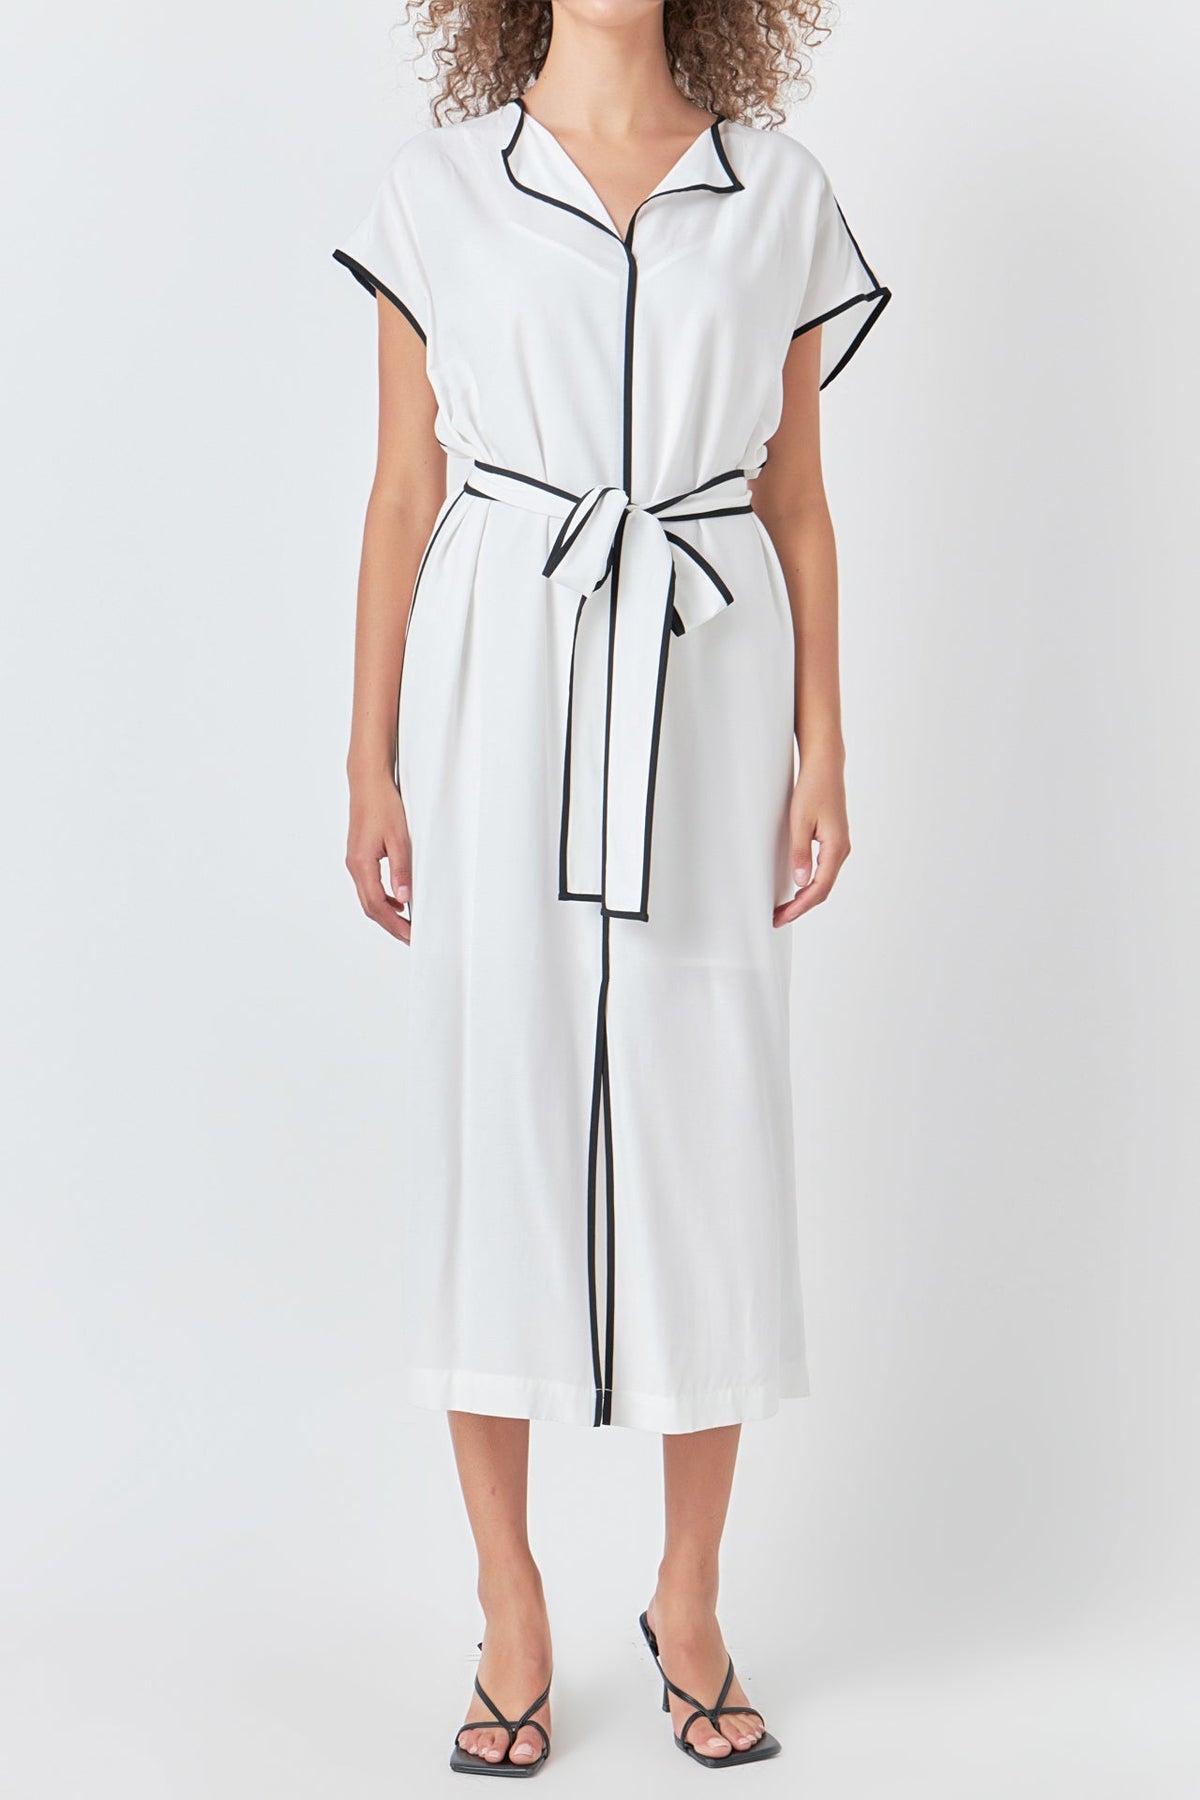 ENDLESS ROSE - Contrast Binding Belted Midi Dress - DRESSES available at Objectrare